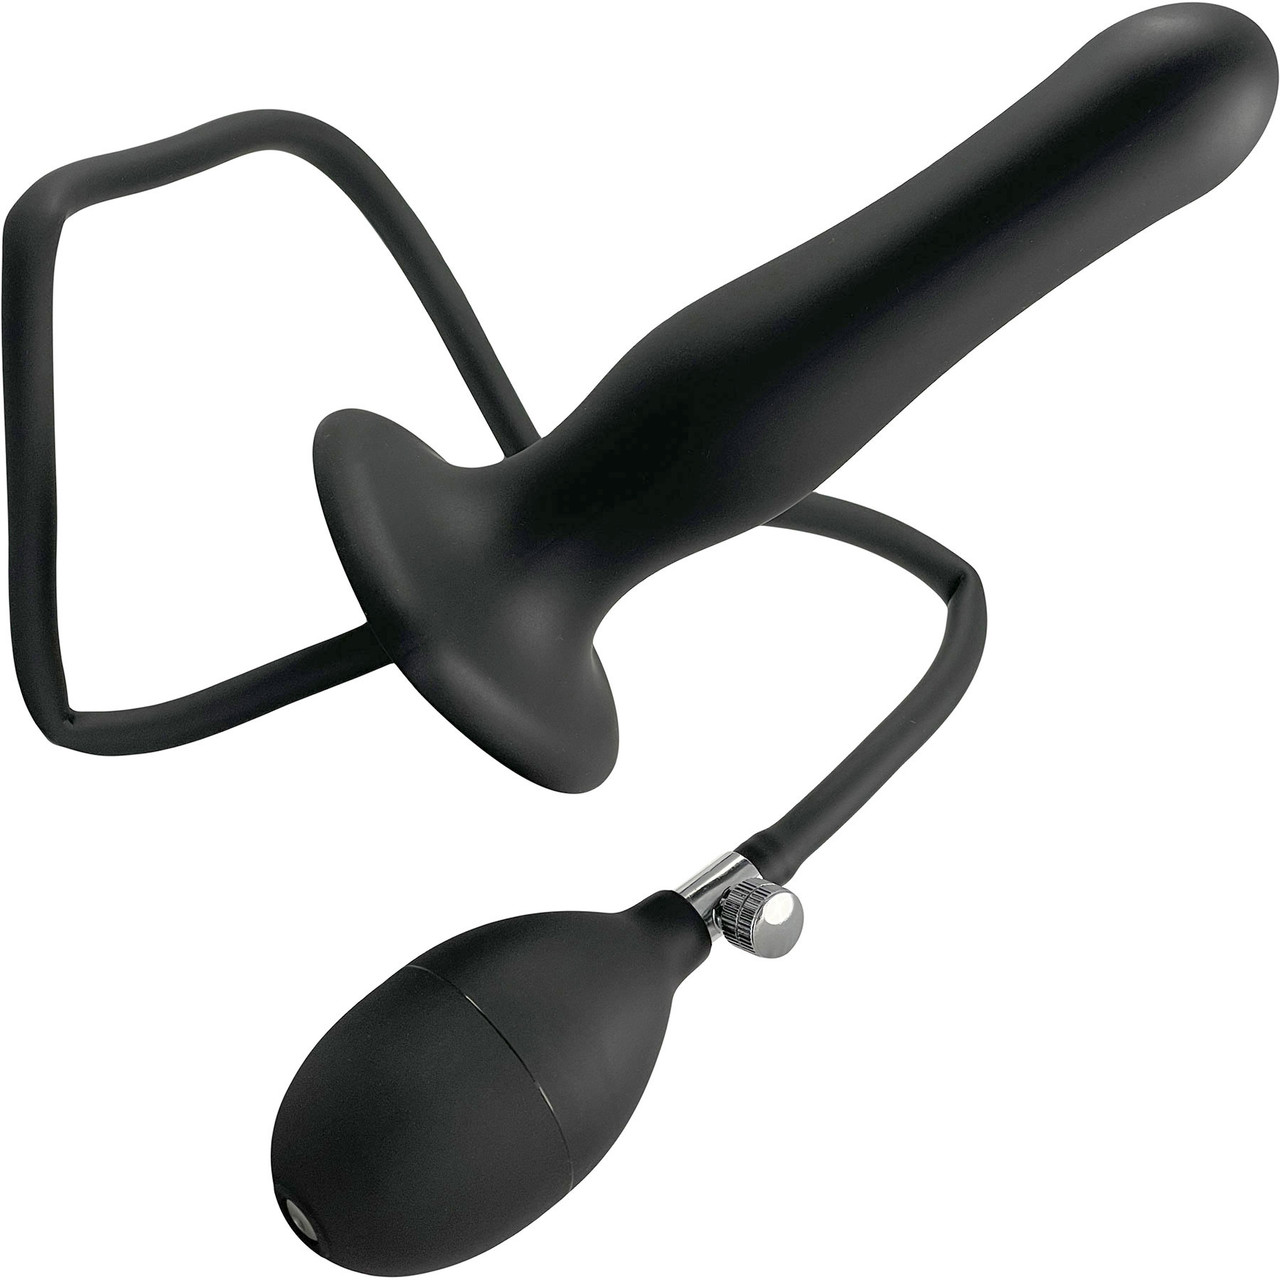 Strap-on-Me Inflatable Silicone Suction Cup Dildo Plug Porn Photo